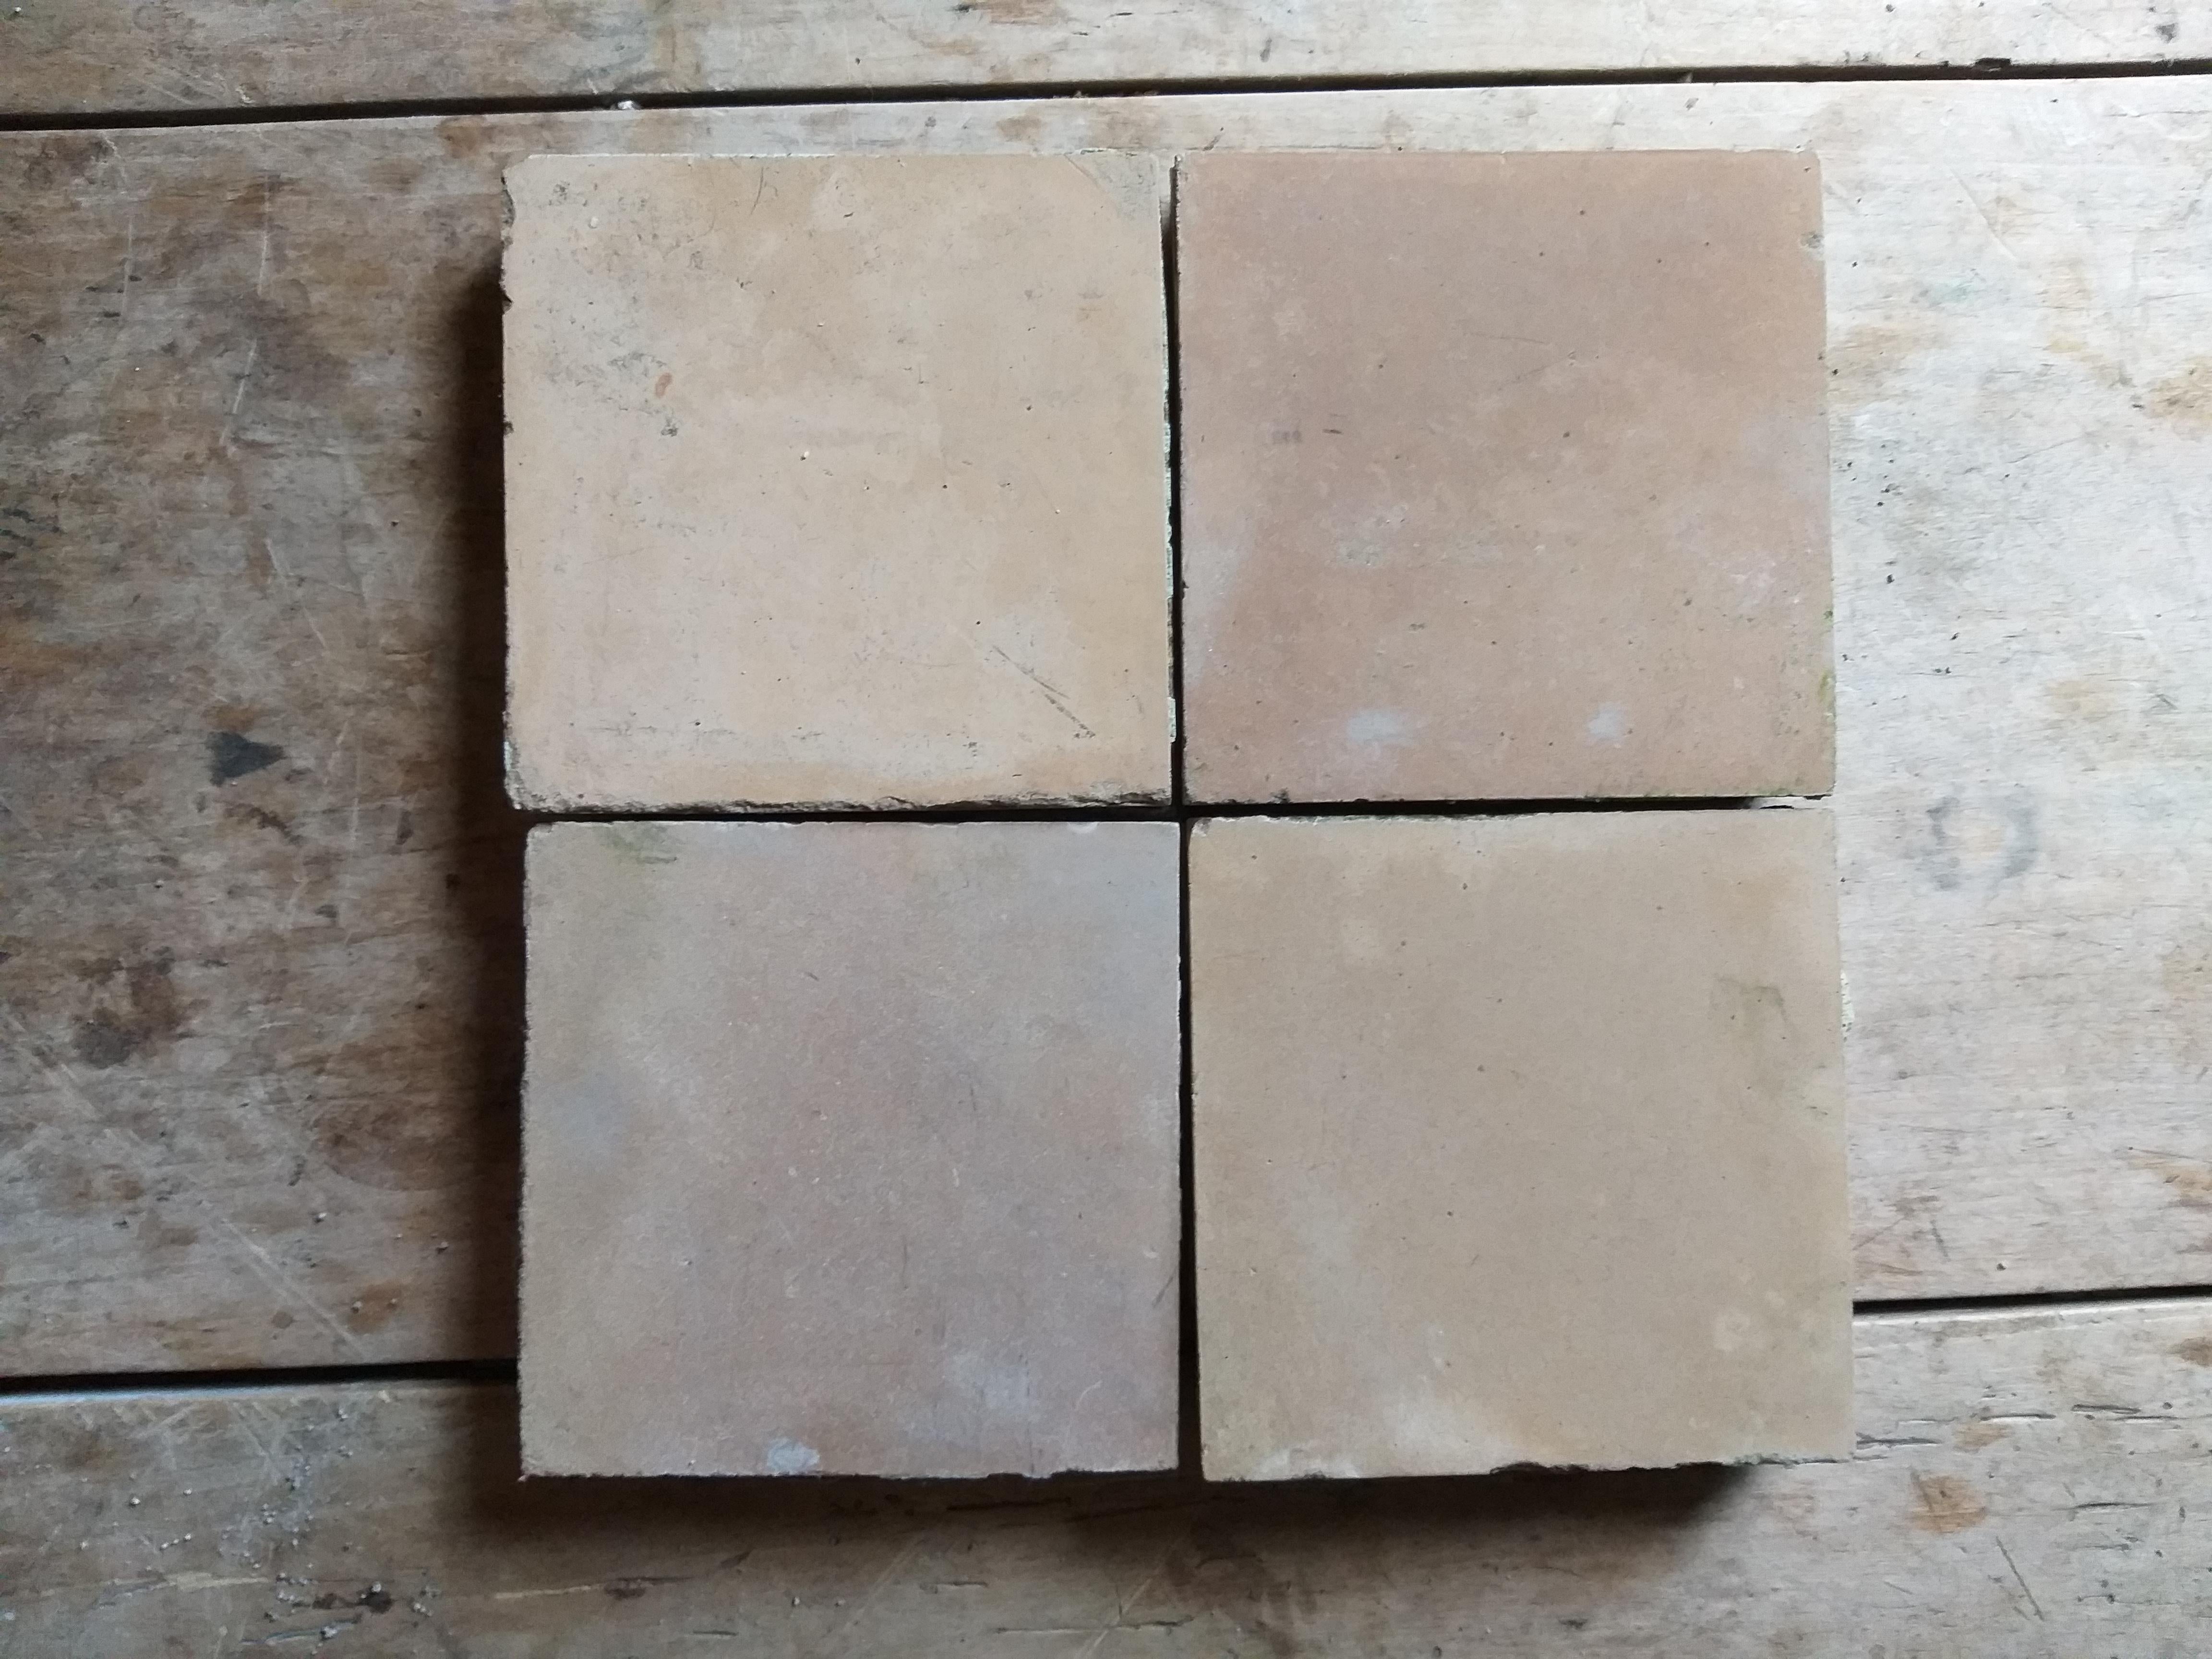 Approx. 110 square meter strong caustic-ciment floortiles from the early 20th century.
In very good, used condition. Ockre-color, soft variation/nuances from a tile to another.
Traces of mortar remains at the backside of each tile, but can be